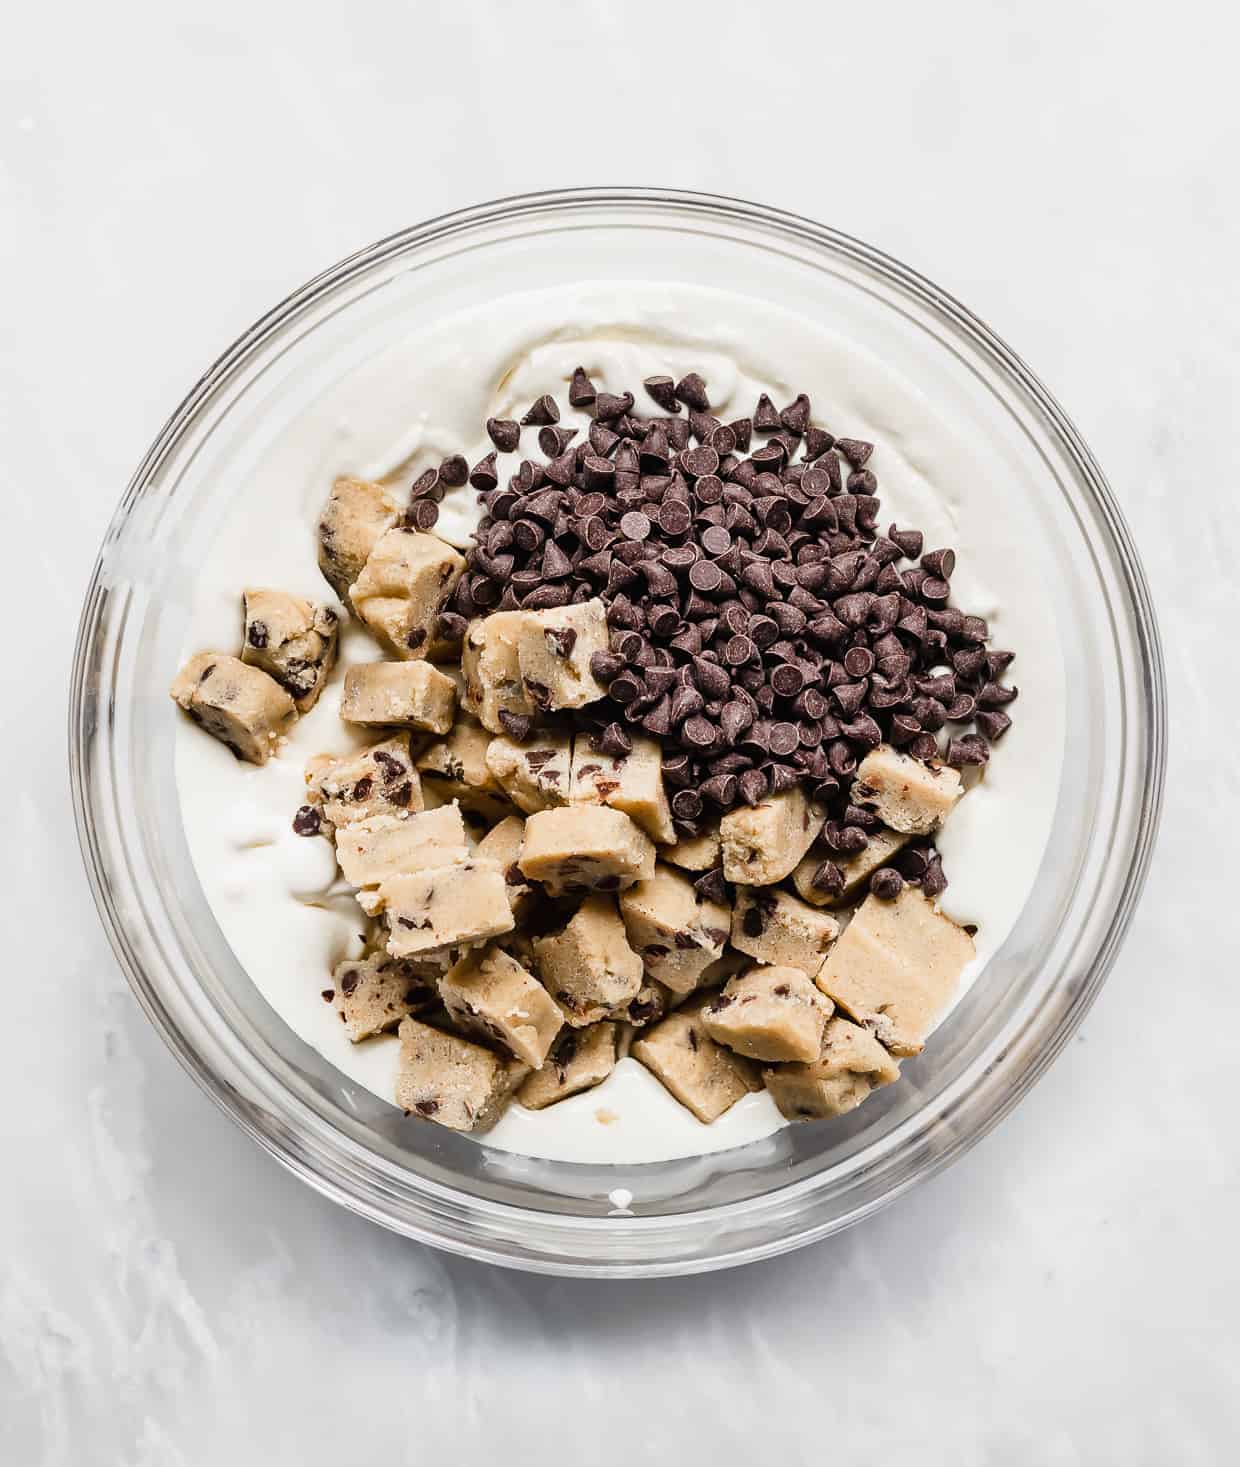 Vanilla ice cream, cookie dough bites, and mini chocolate chips in a glass bowl against a white background.